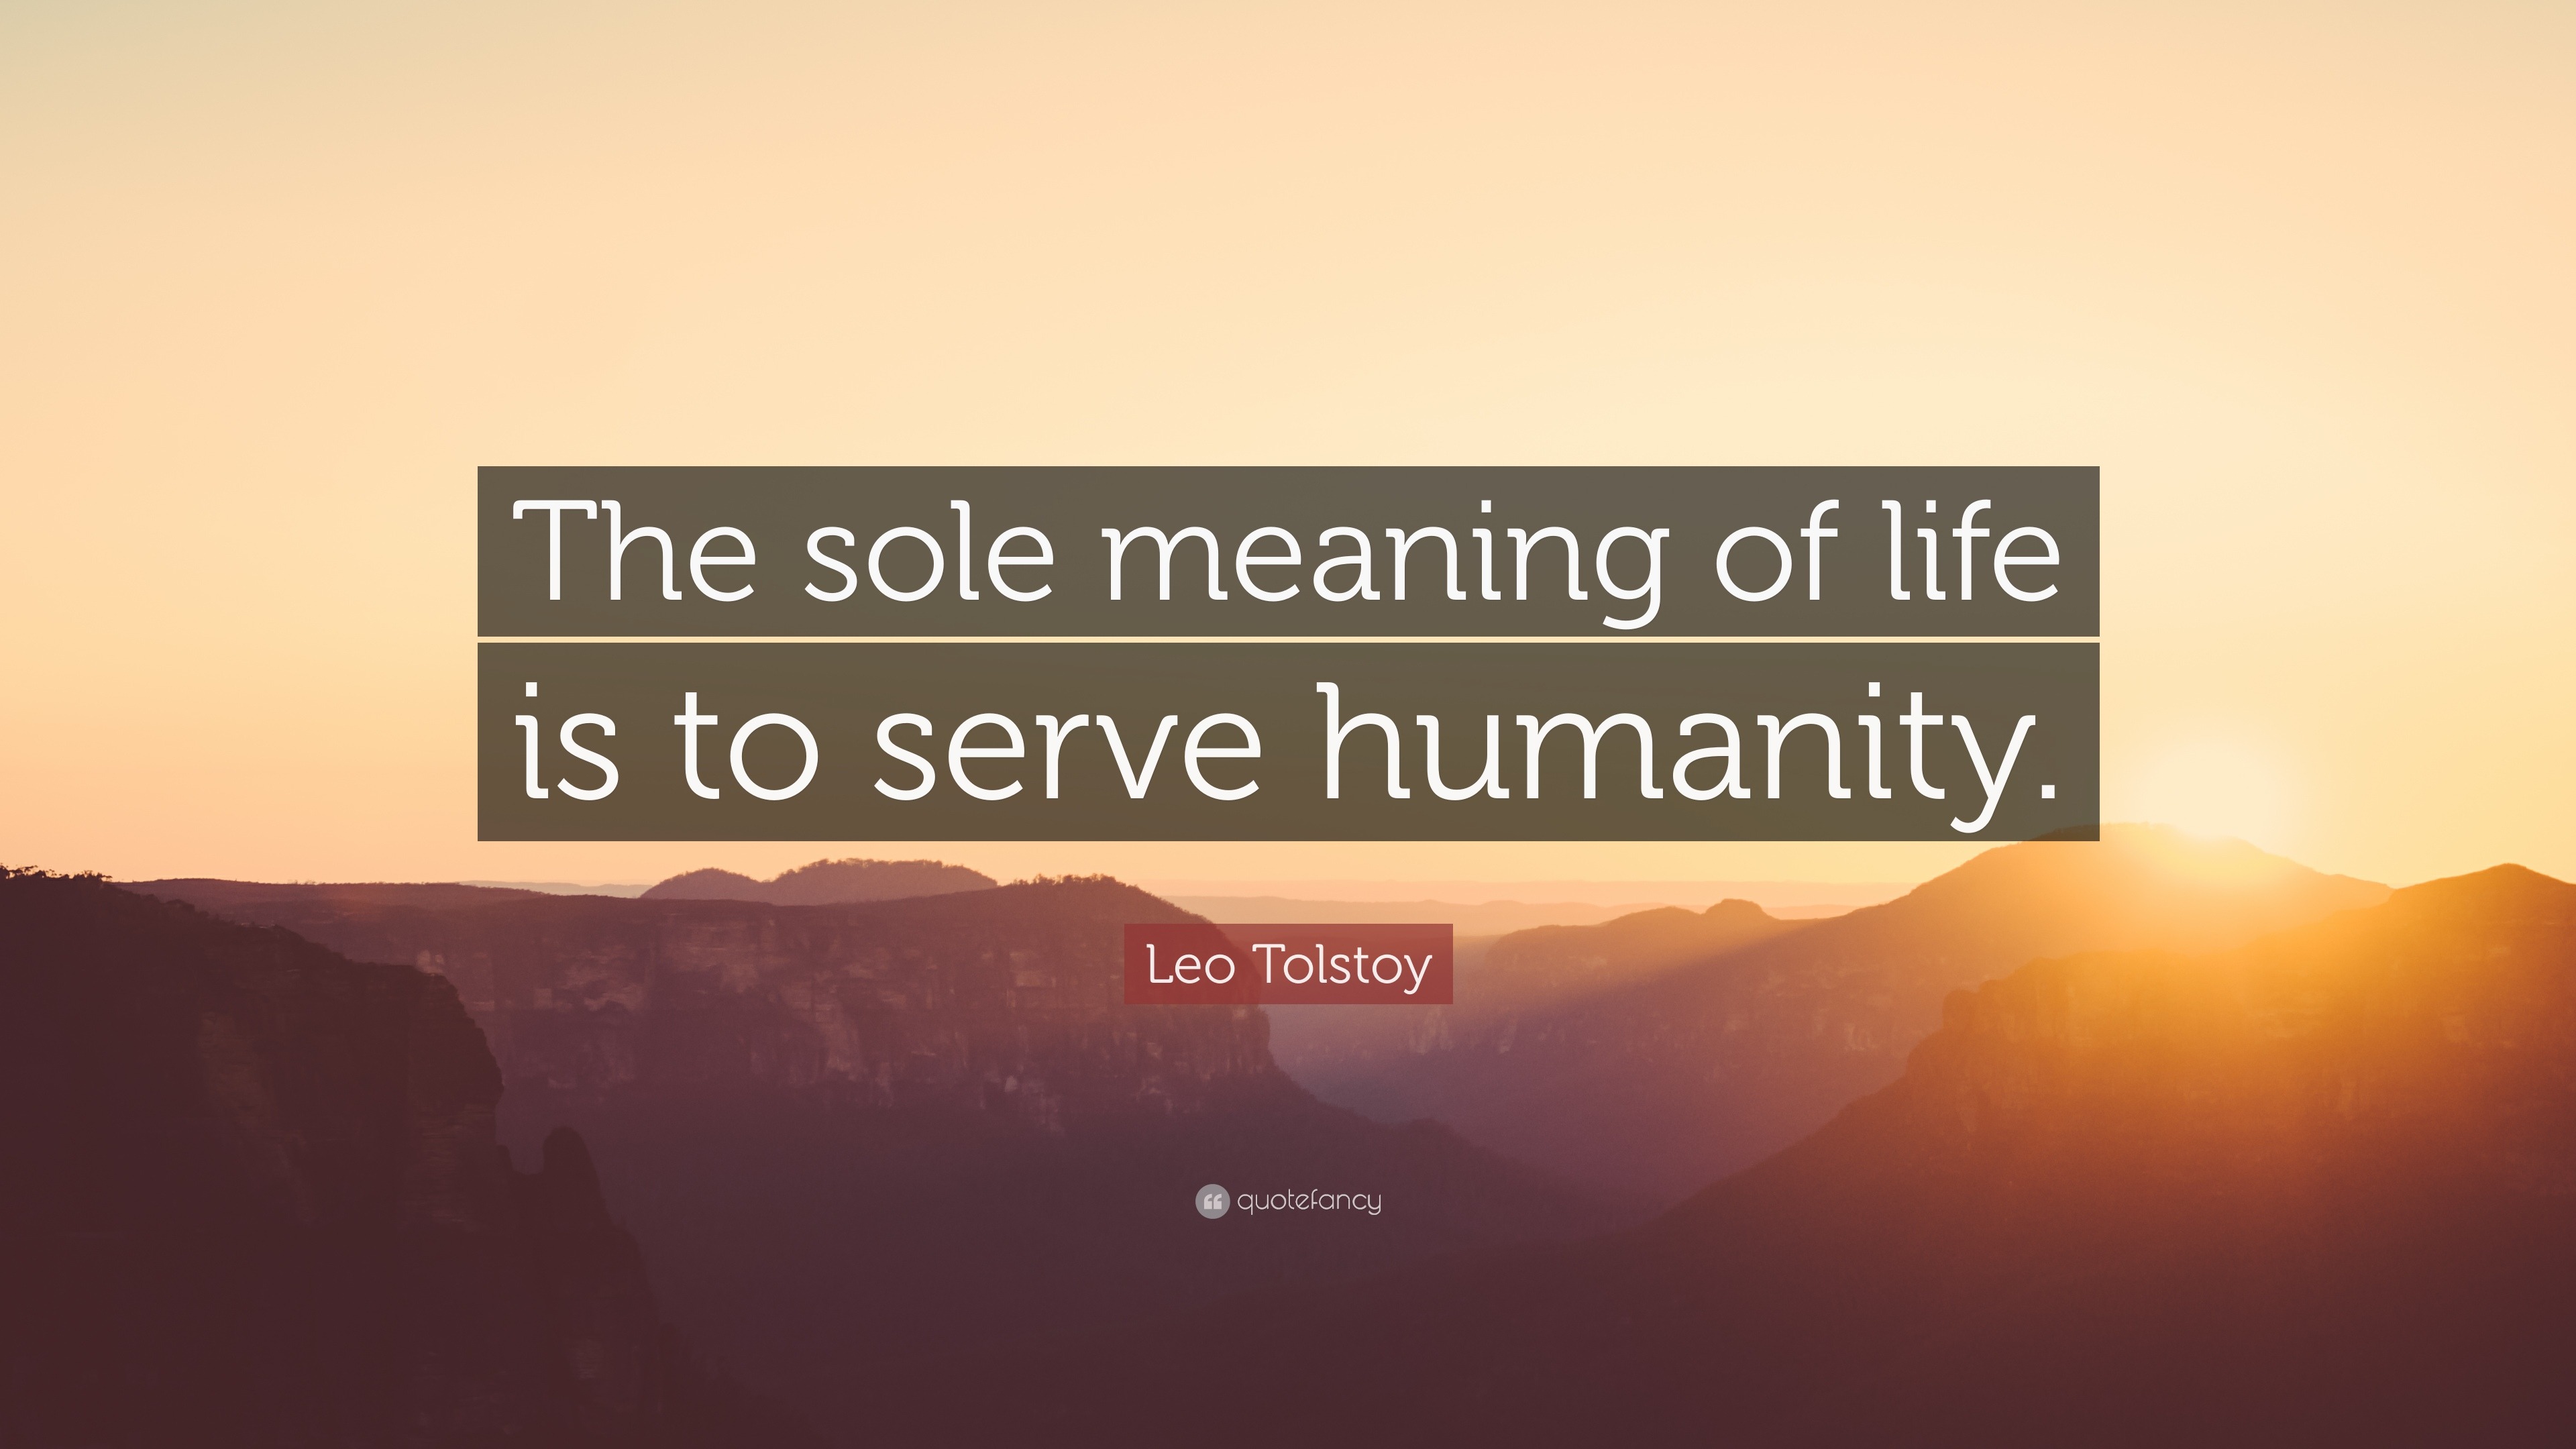 Leo Tolstoy Quote “The sole meaning of life is to serve